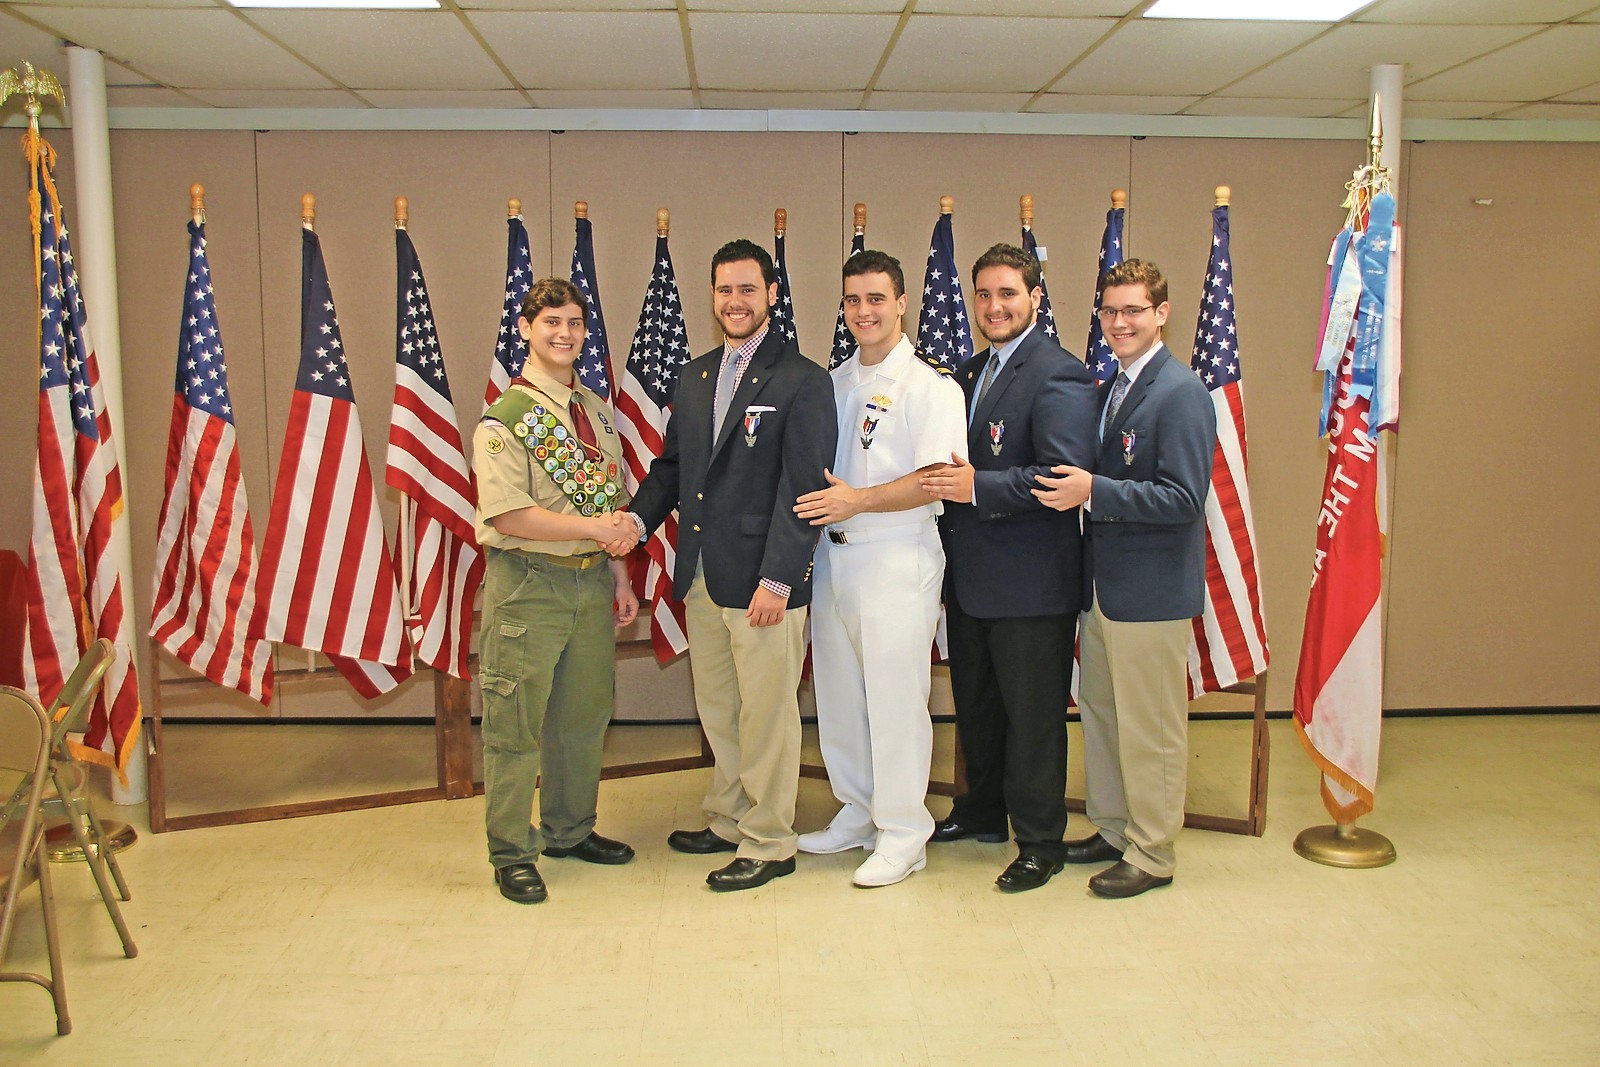 New Eagle Scout Nathaniel Lettieri, left, was congratulated by his brothers, who also are Eagle Scouts, Philip, Vincent, Quentin and Joseph at his Court of Honor ceremony on June 4.